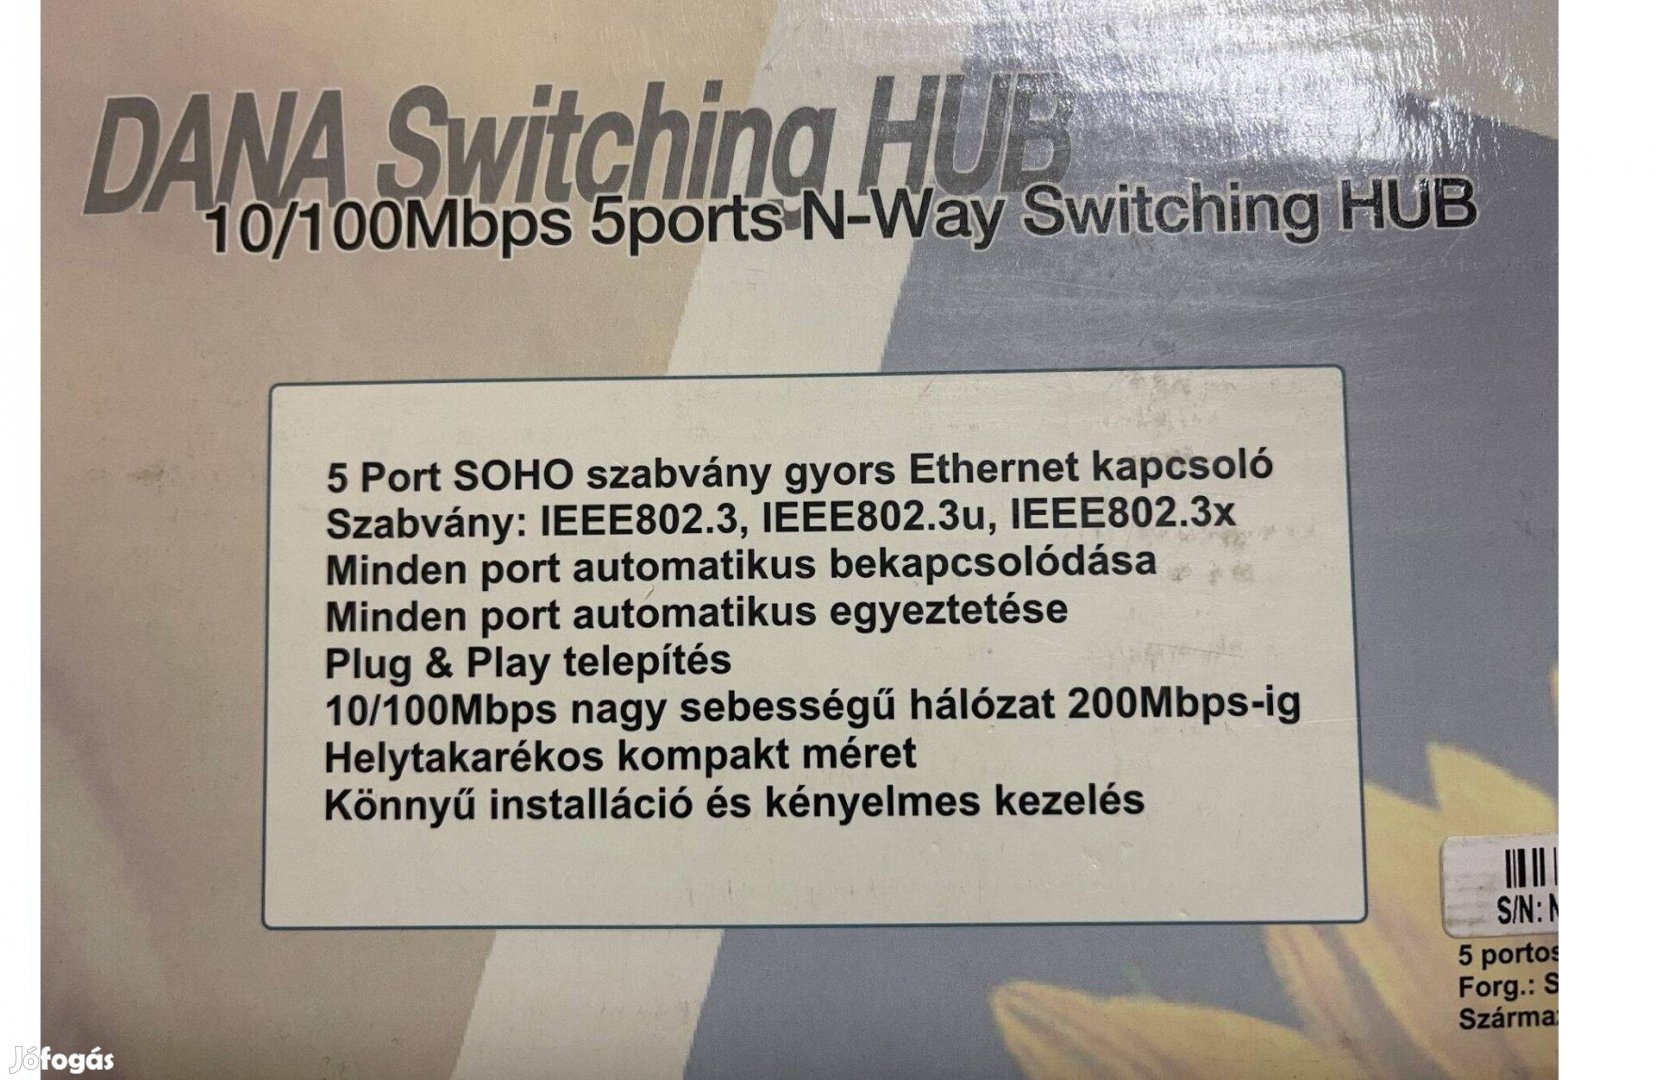 Switching Hub 10/100 Mbps - 200 Mbps-ig. 5 port-Nway NW550SW